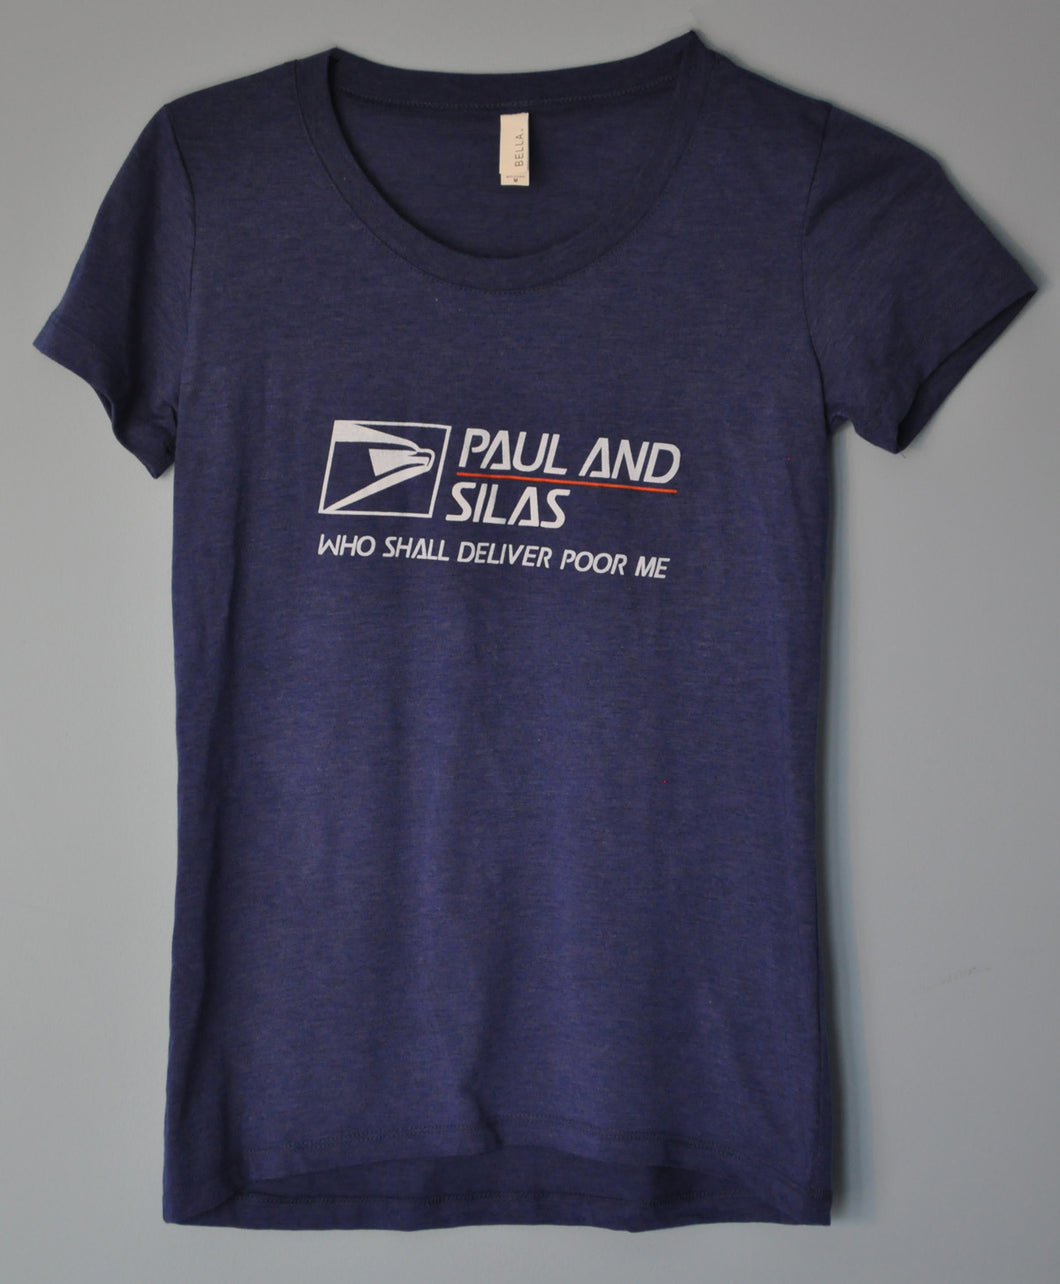 Paul and Silas USPS - Women's Tee